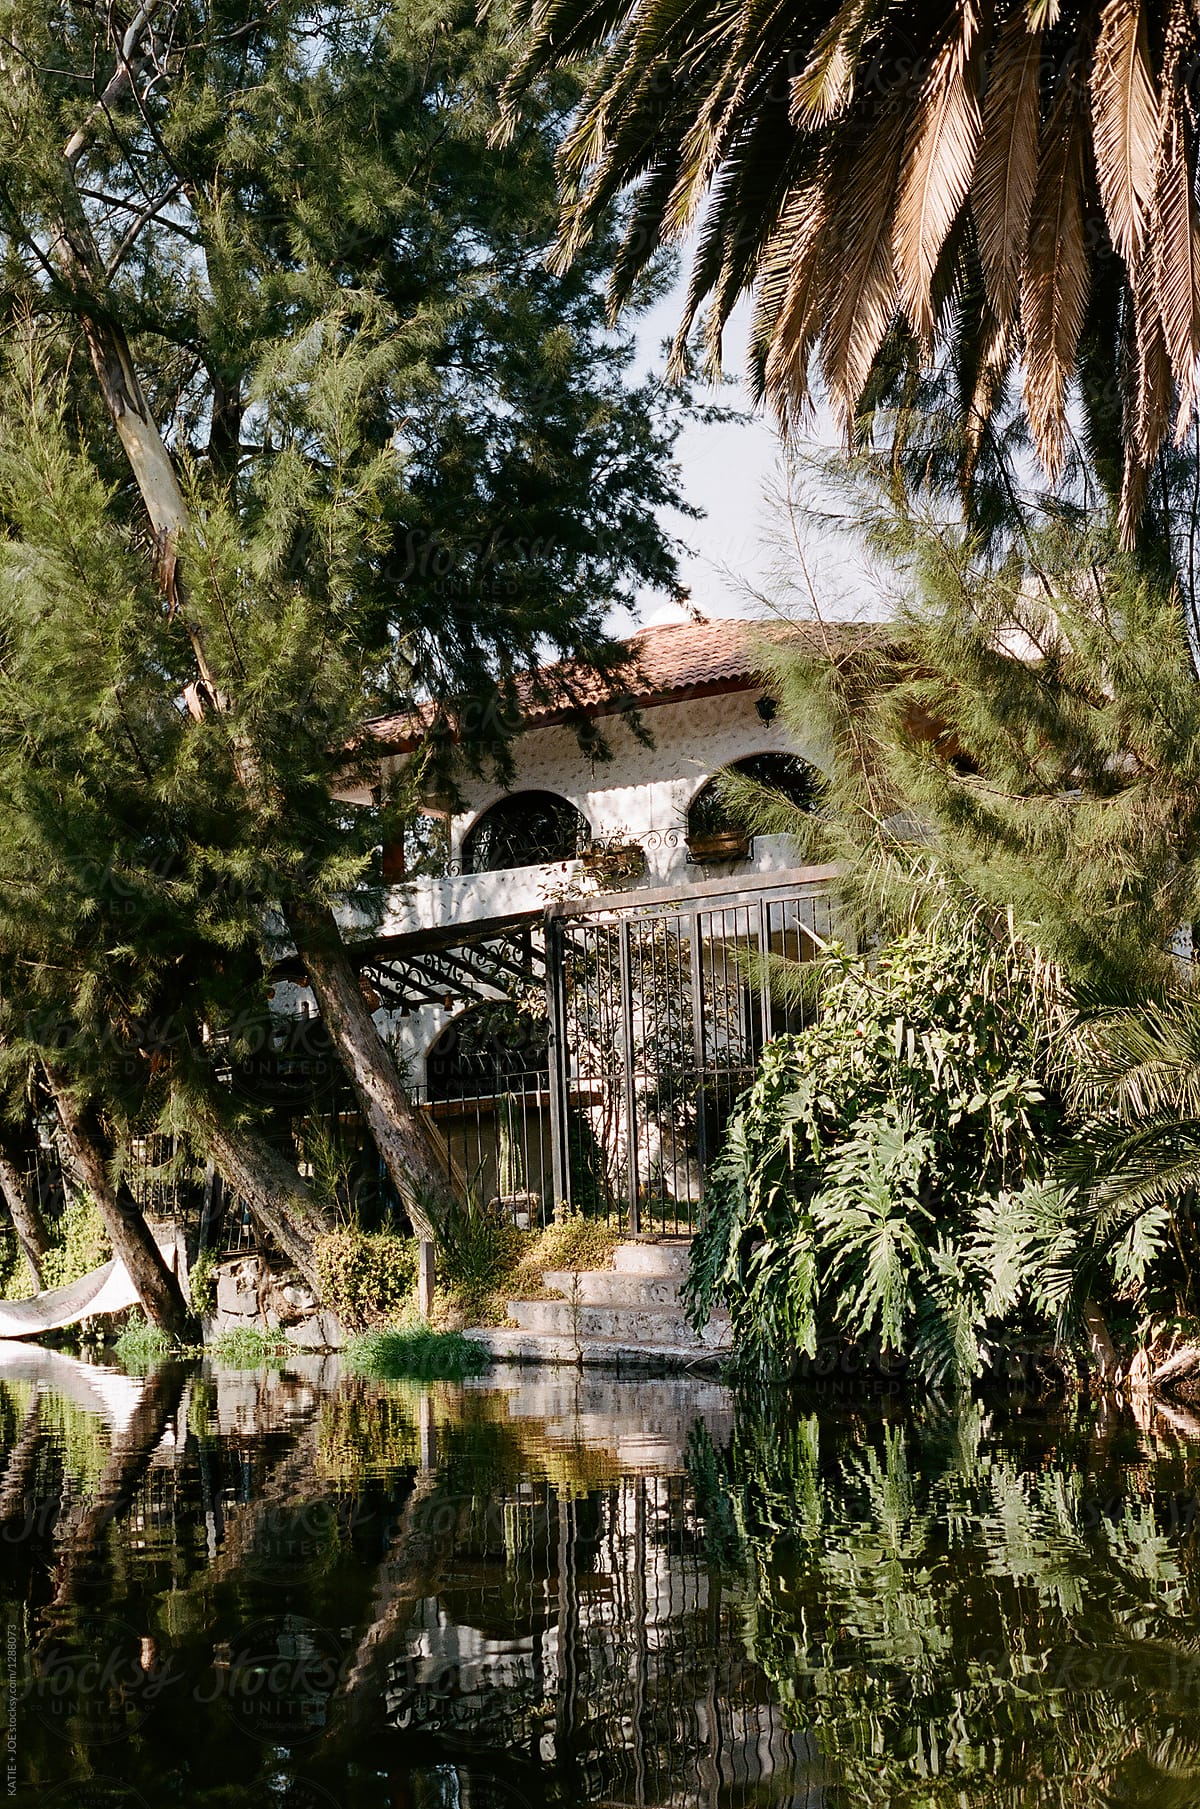 House hidden and shaded by tropical trees on a river